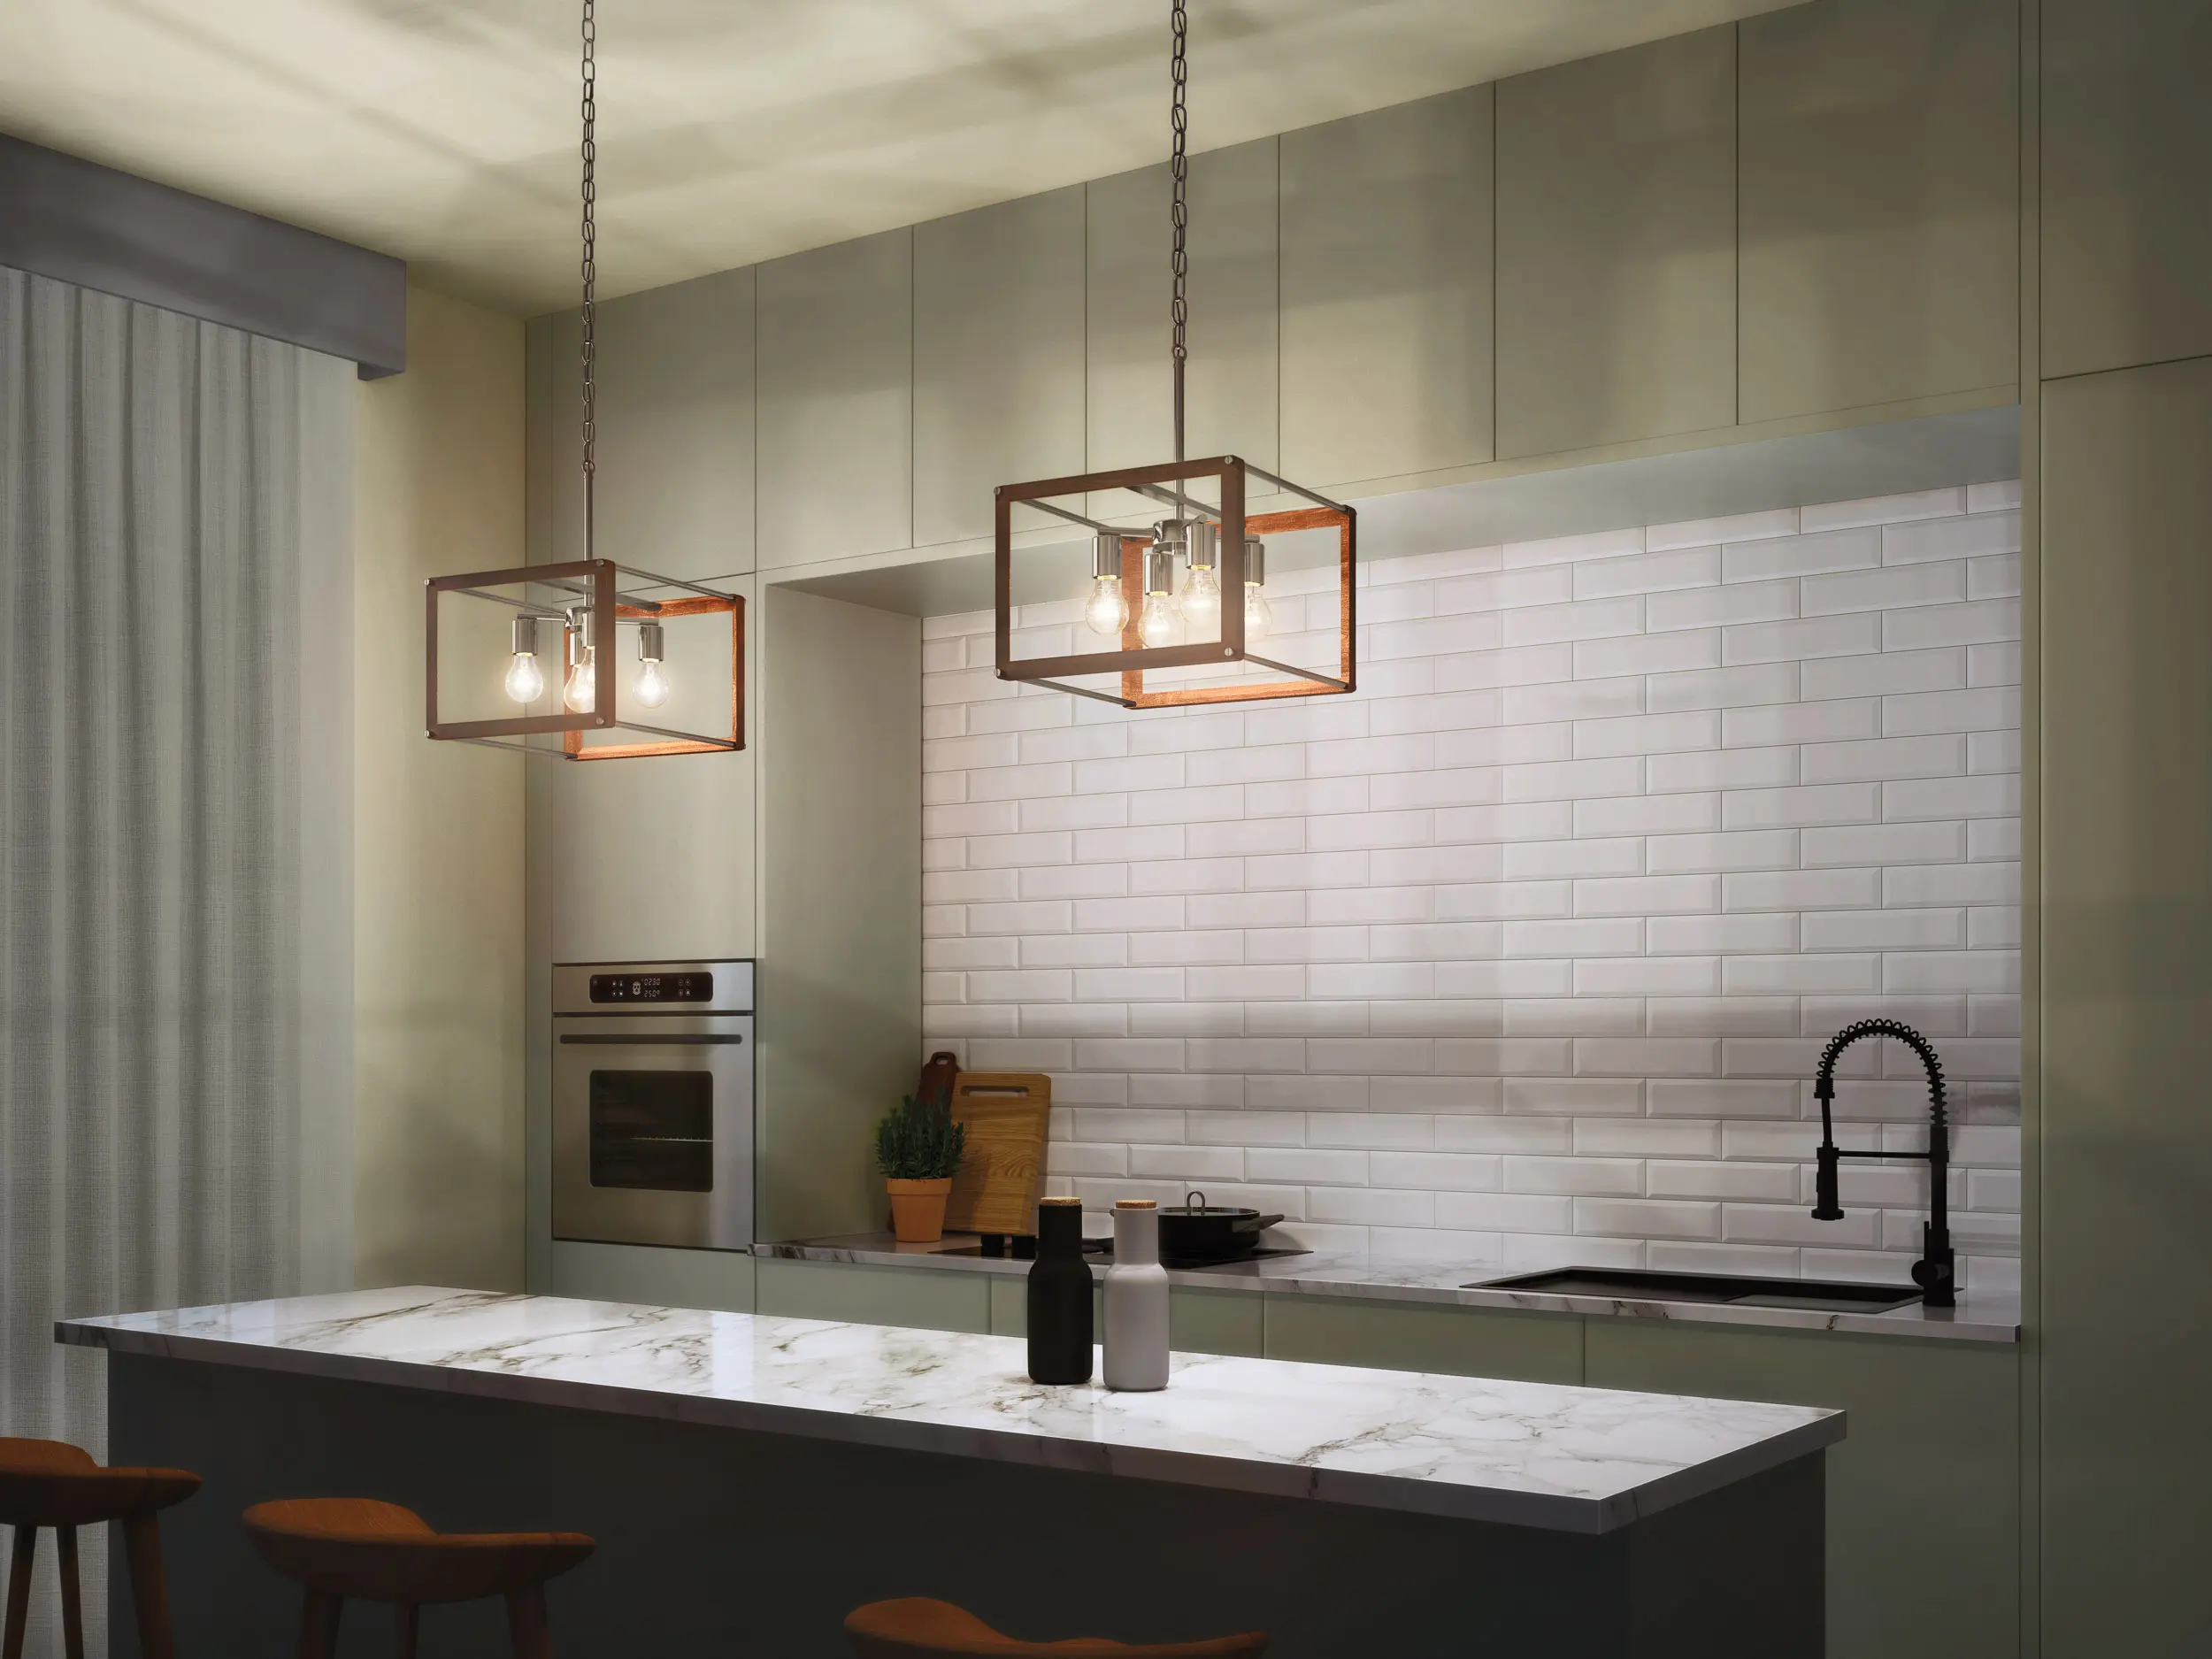 Kitchen island with hanging lights